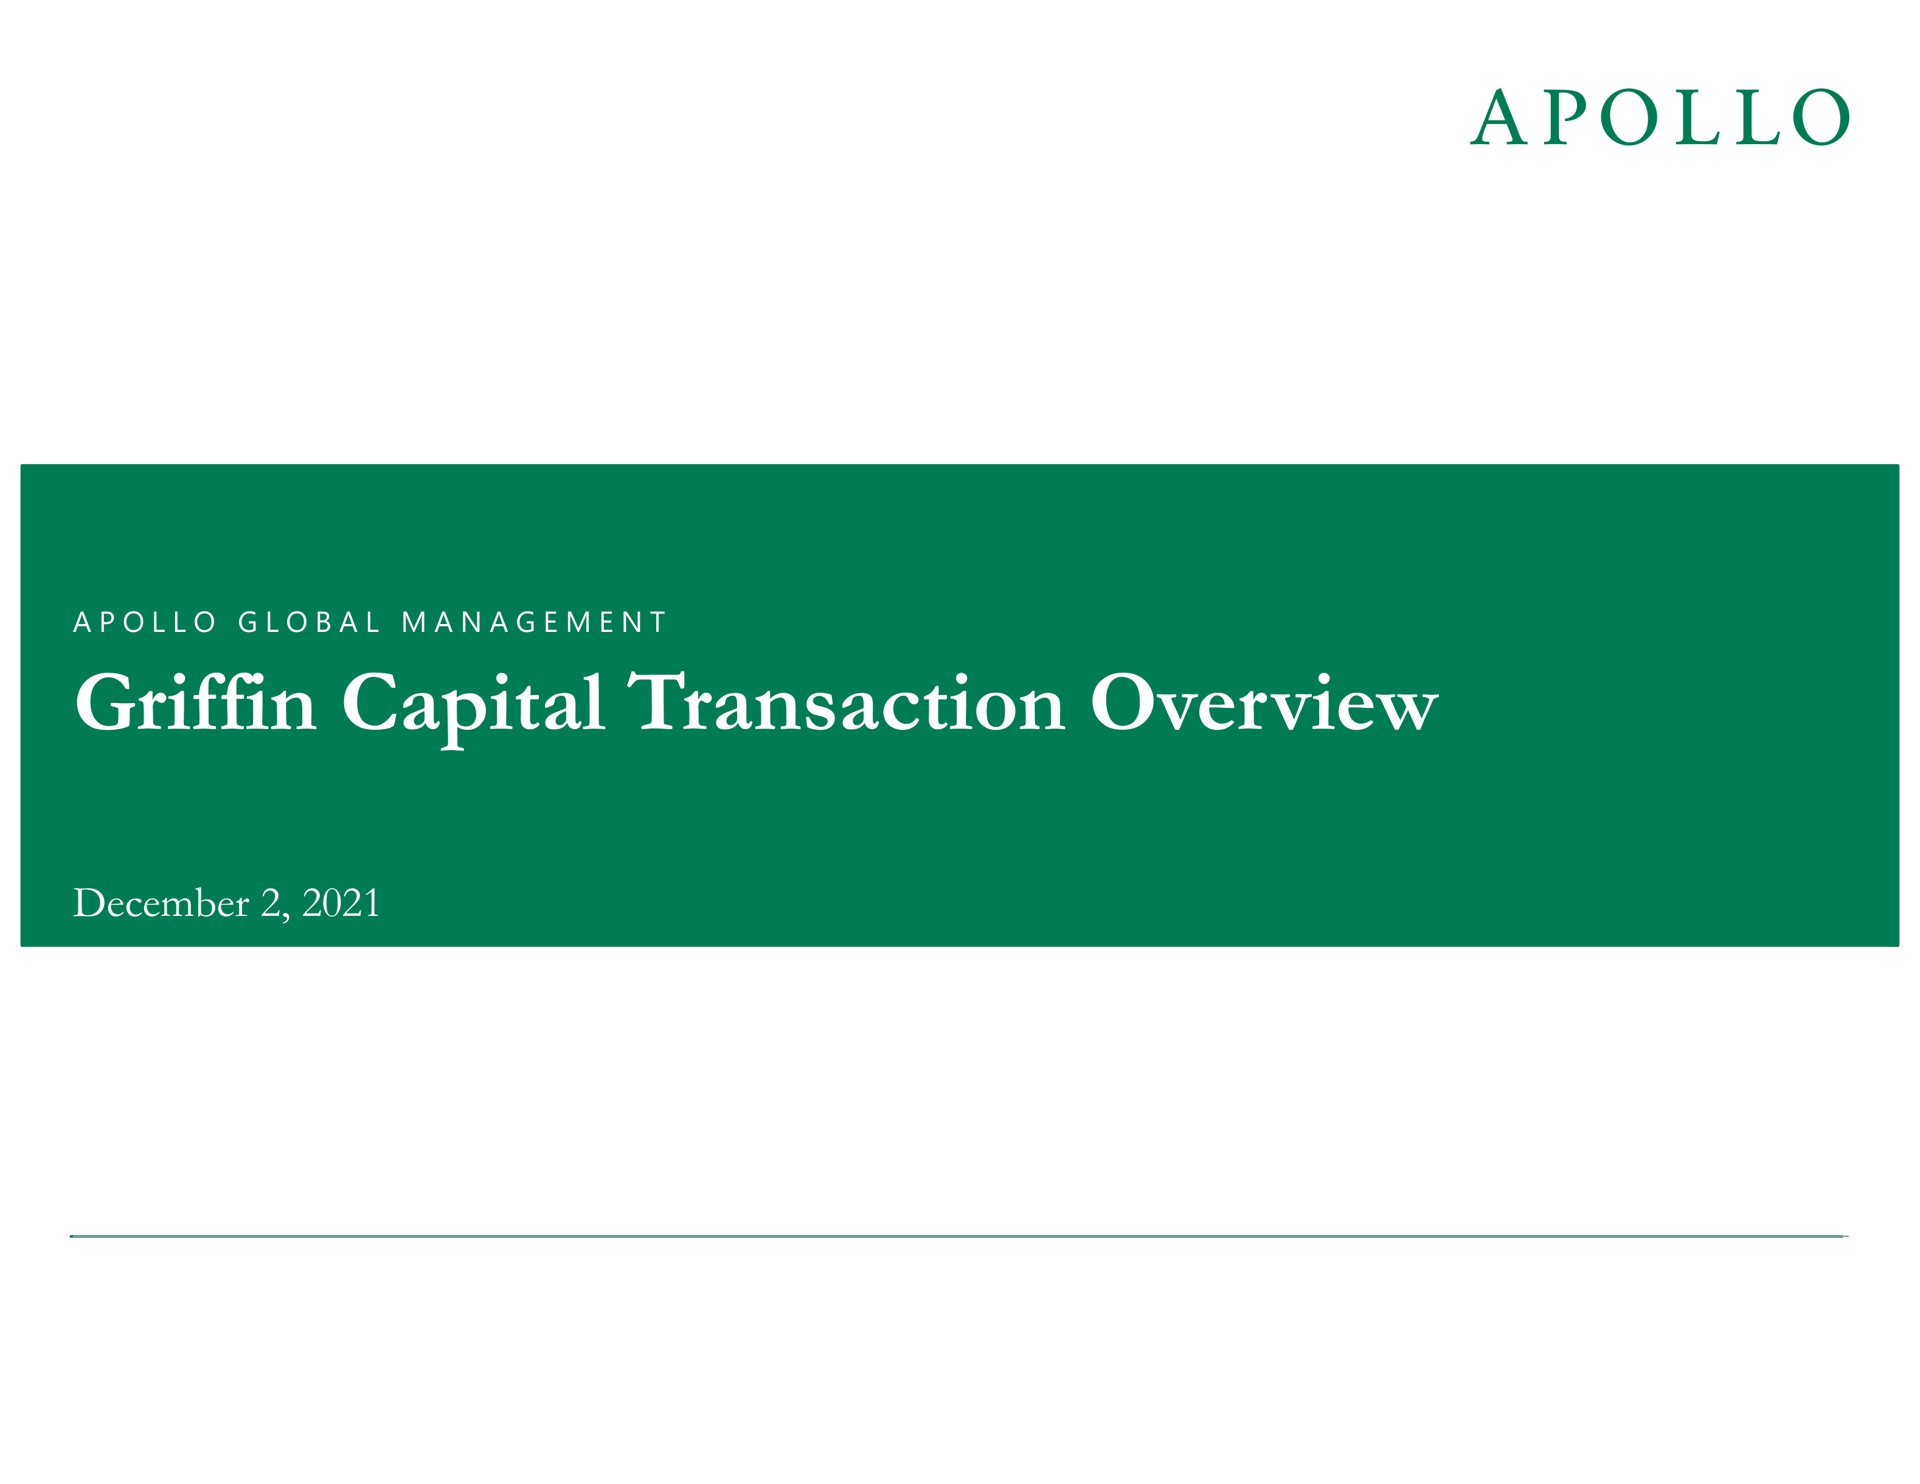 griffin capital transaction overview | Apollo Global Management